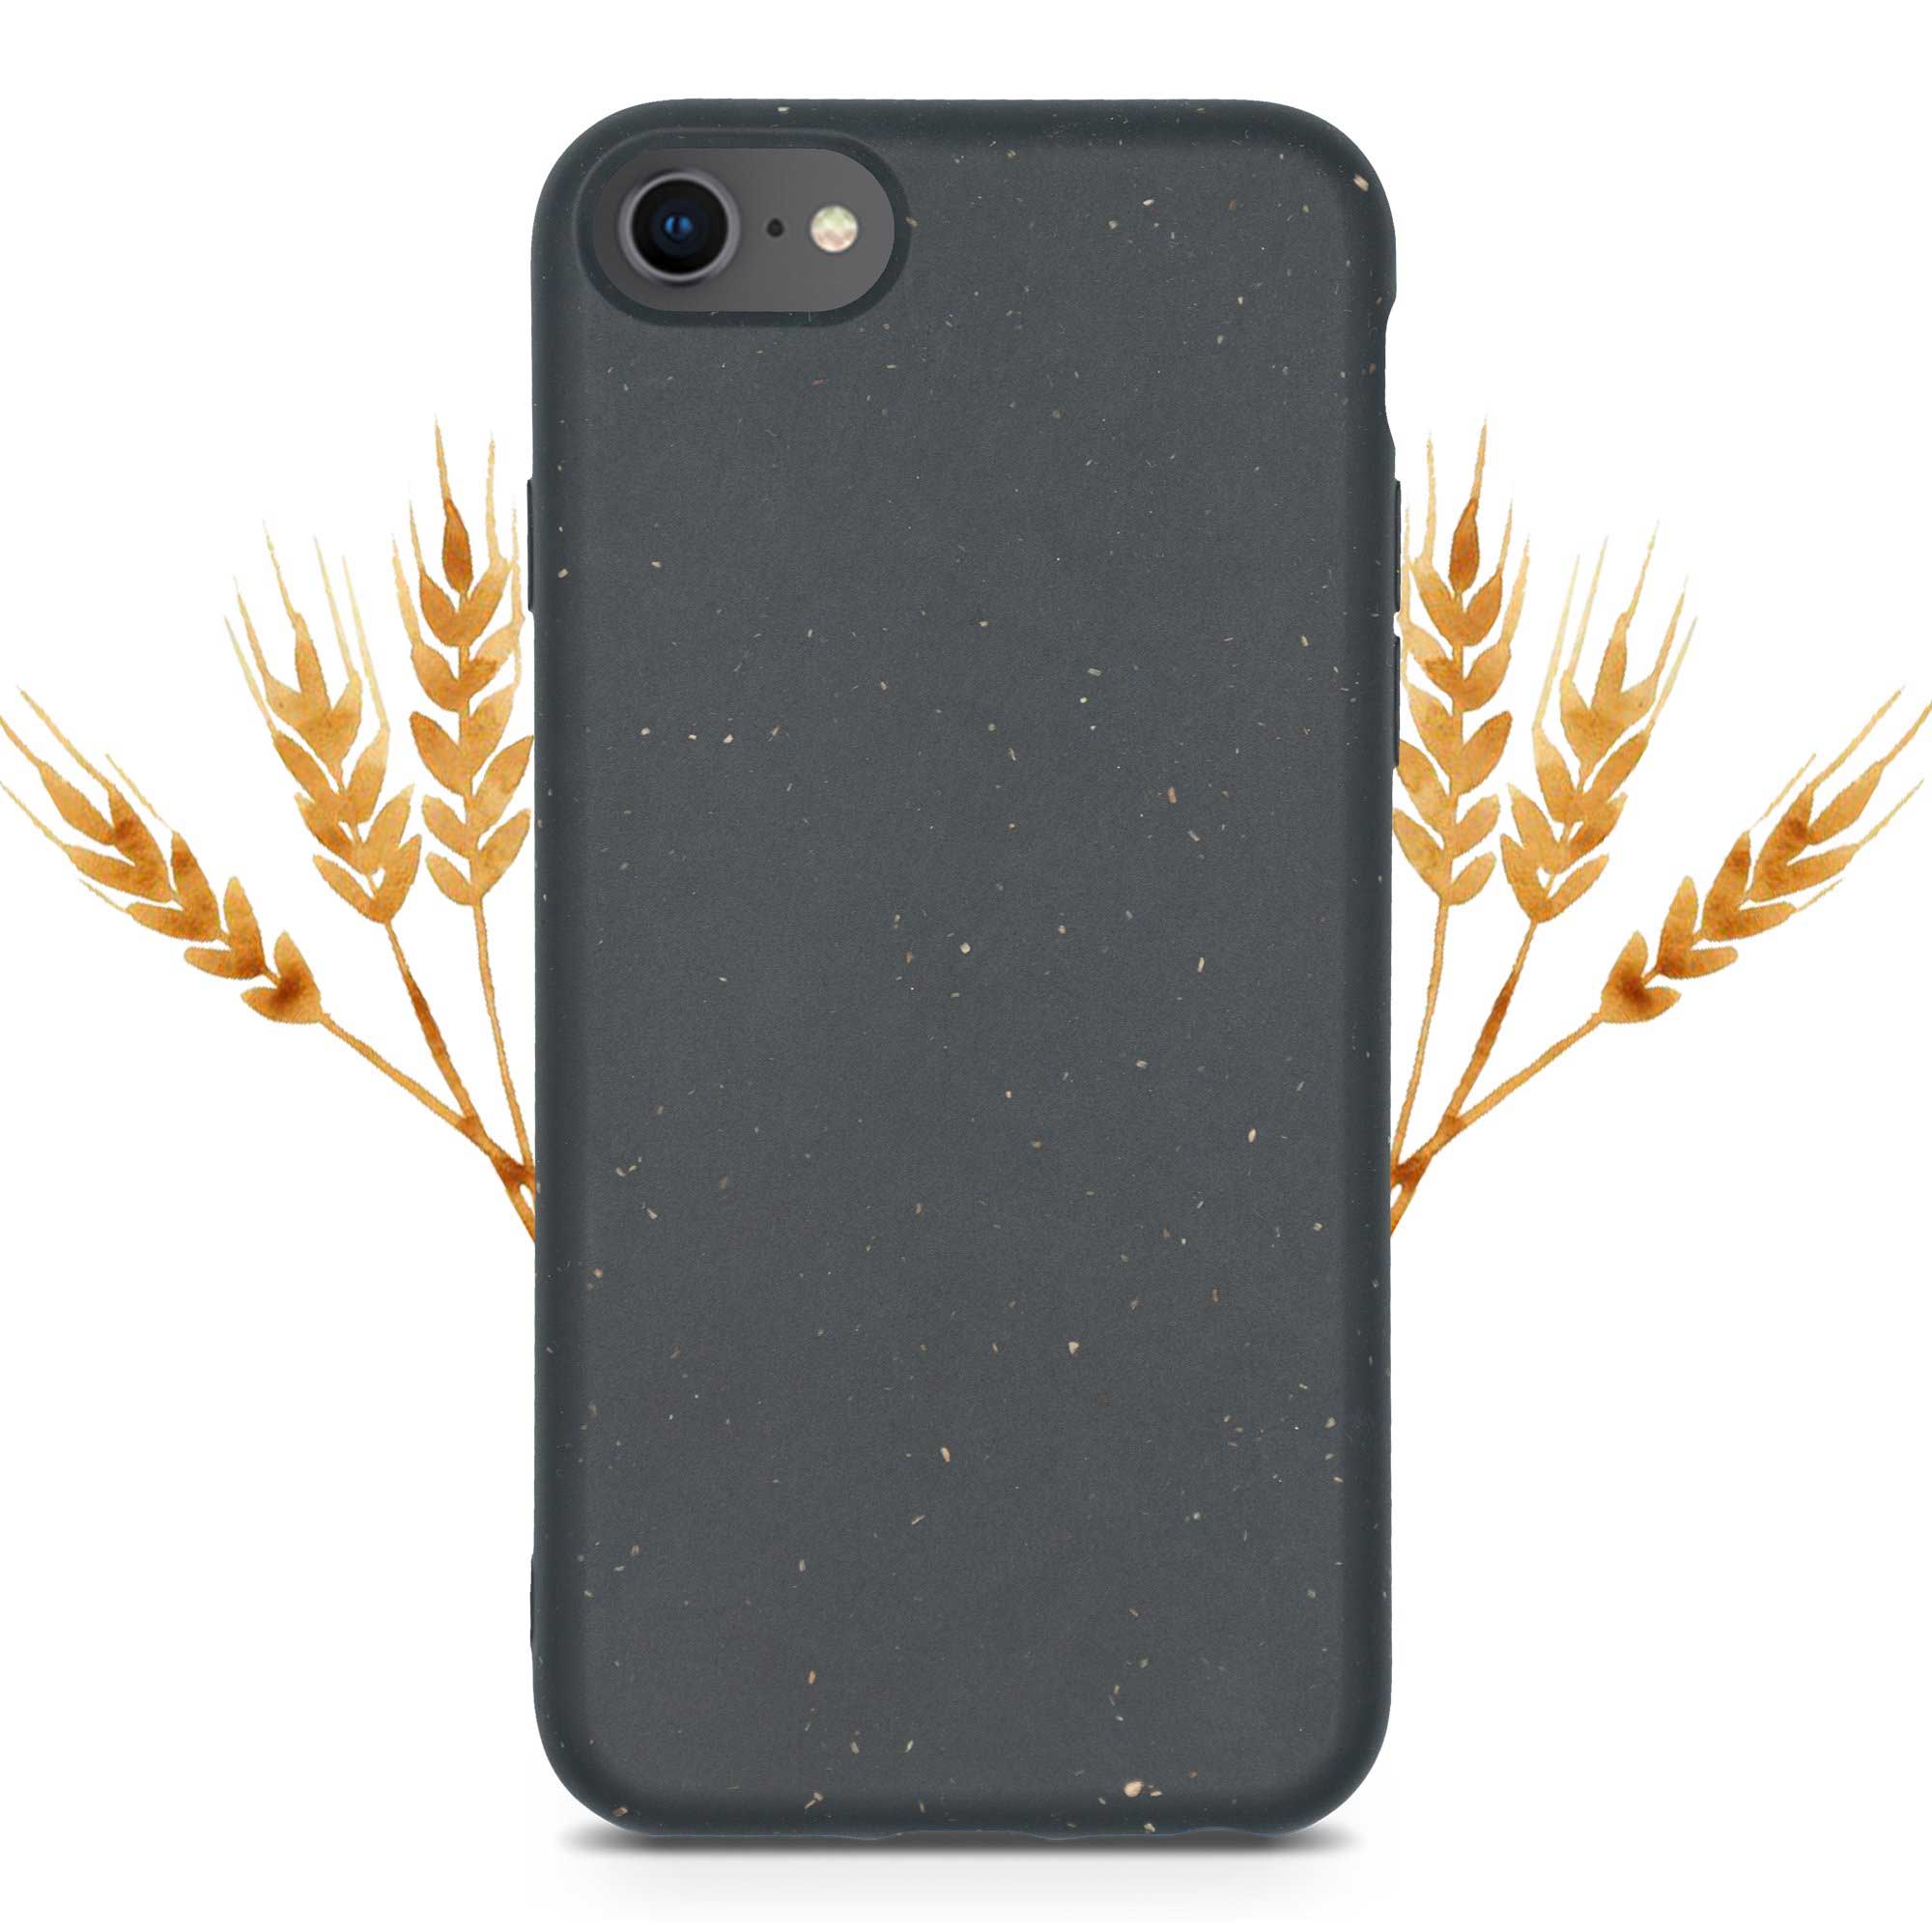 Black Biodegradable Phone Case for iPhone 6